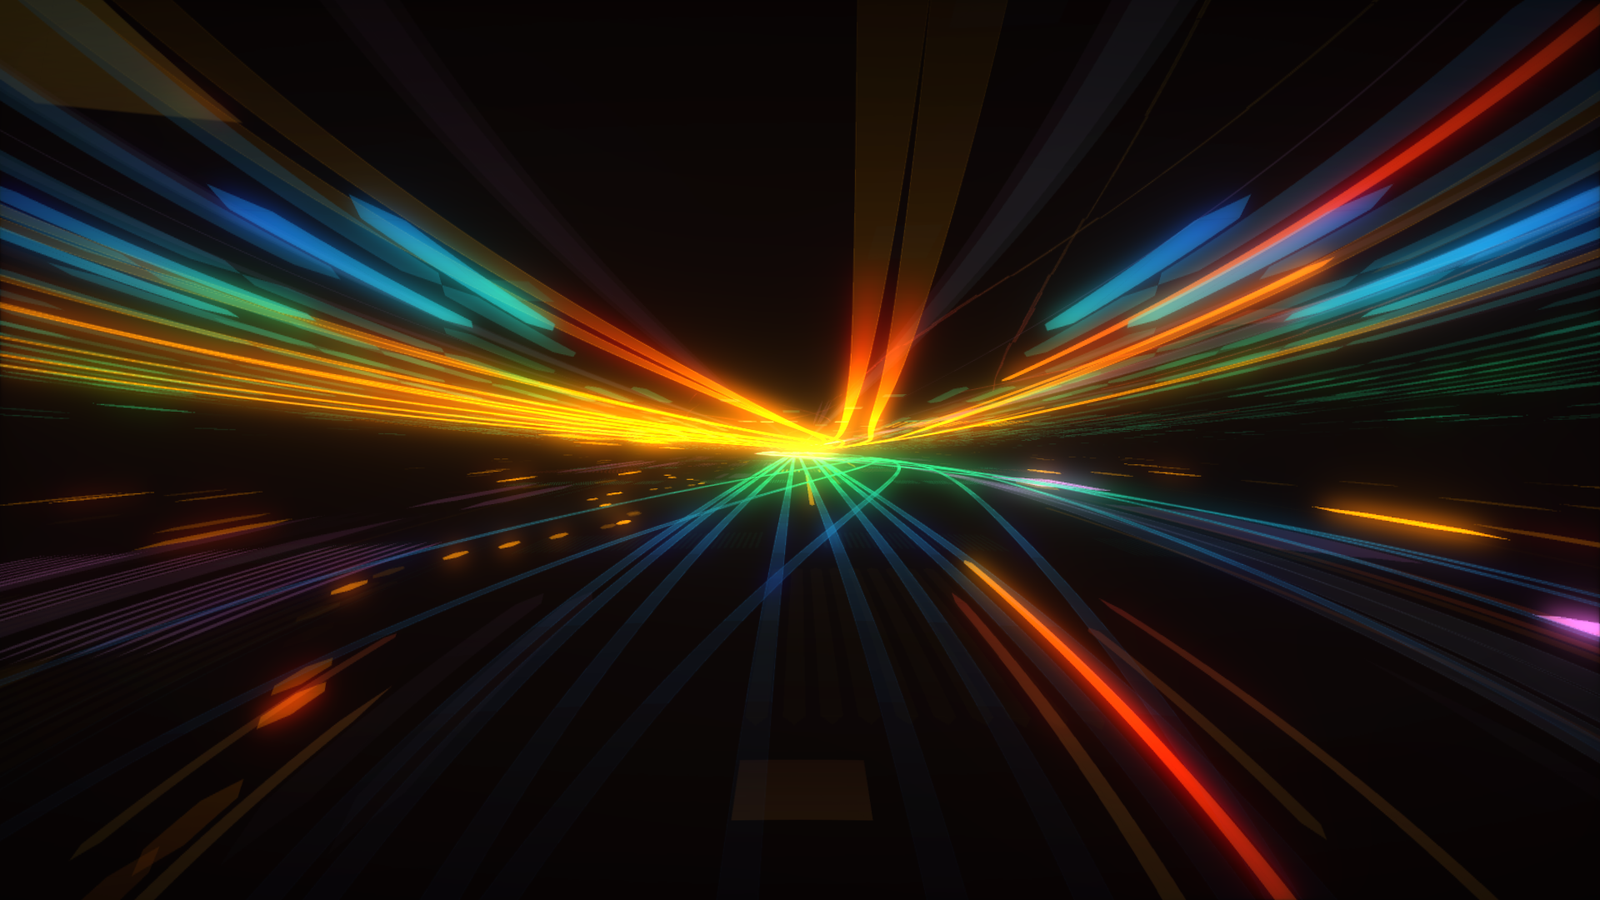 Qgames Releases Music Visualizer For Ps3 Gamer Assault - Ps4 Music Visualizer - HD Wallpaper 